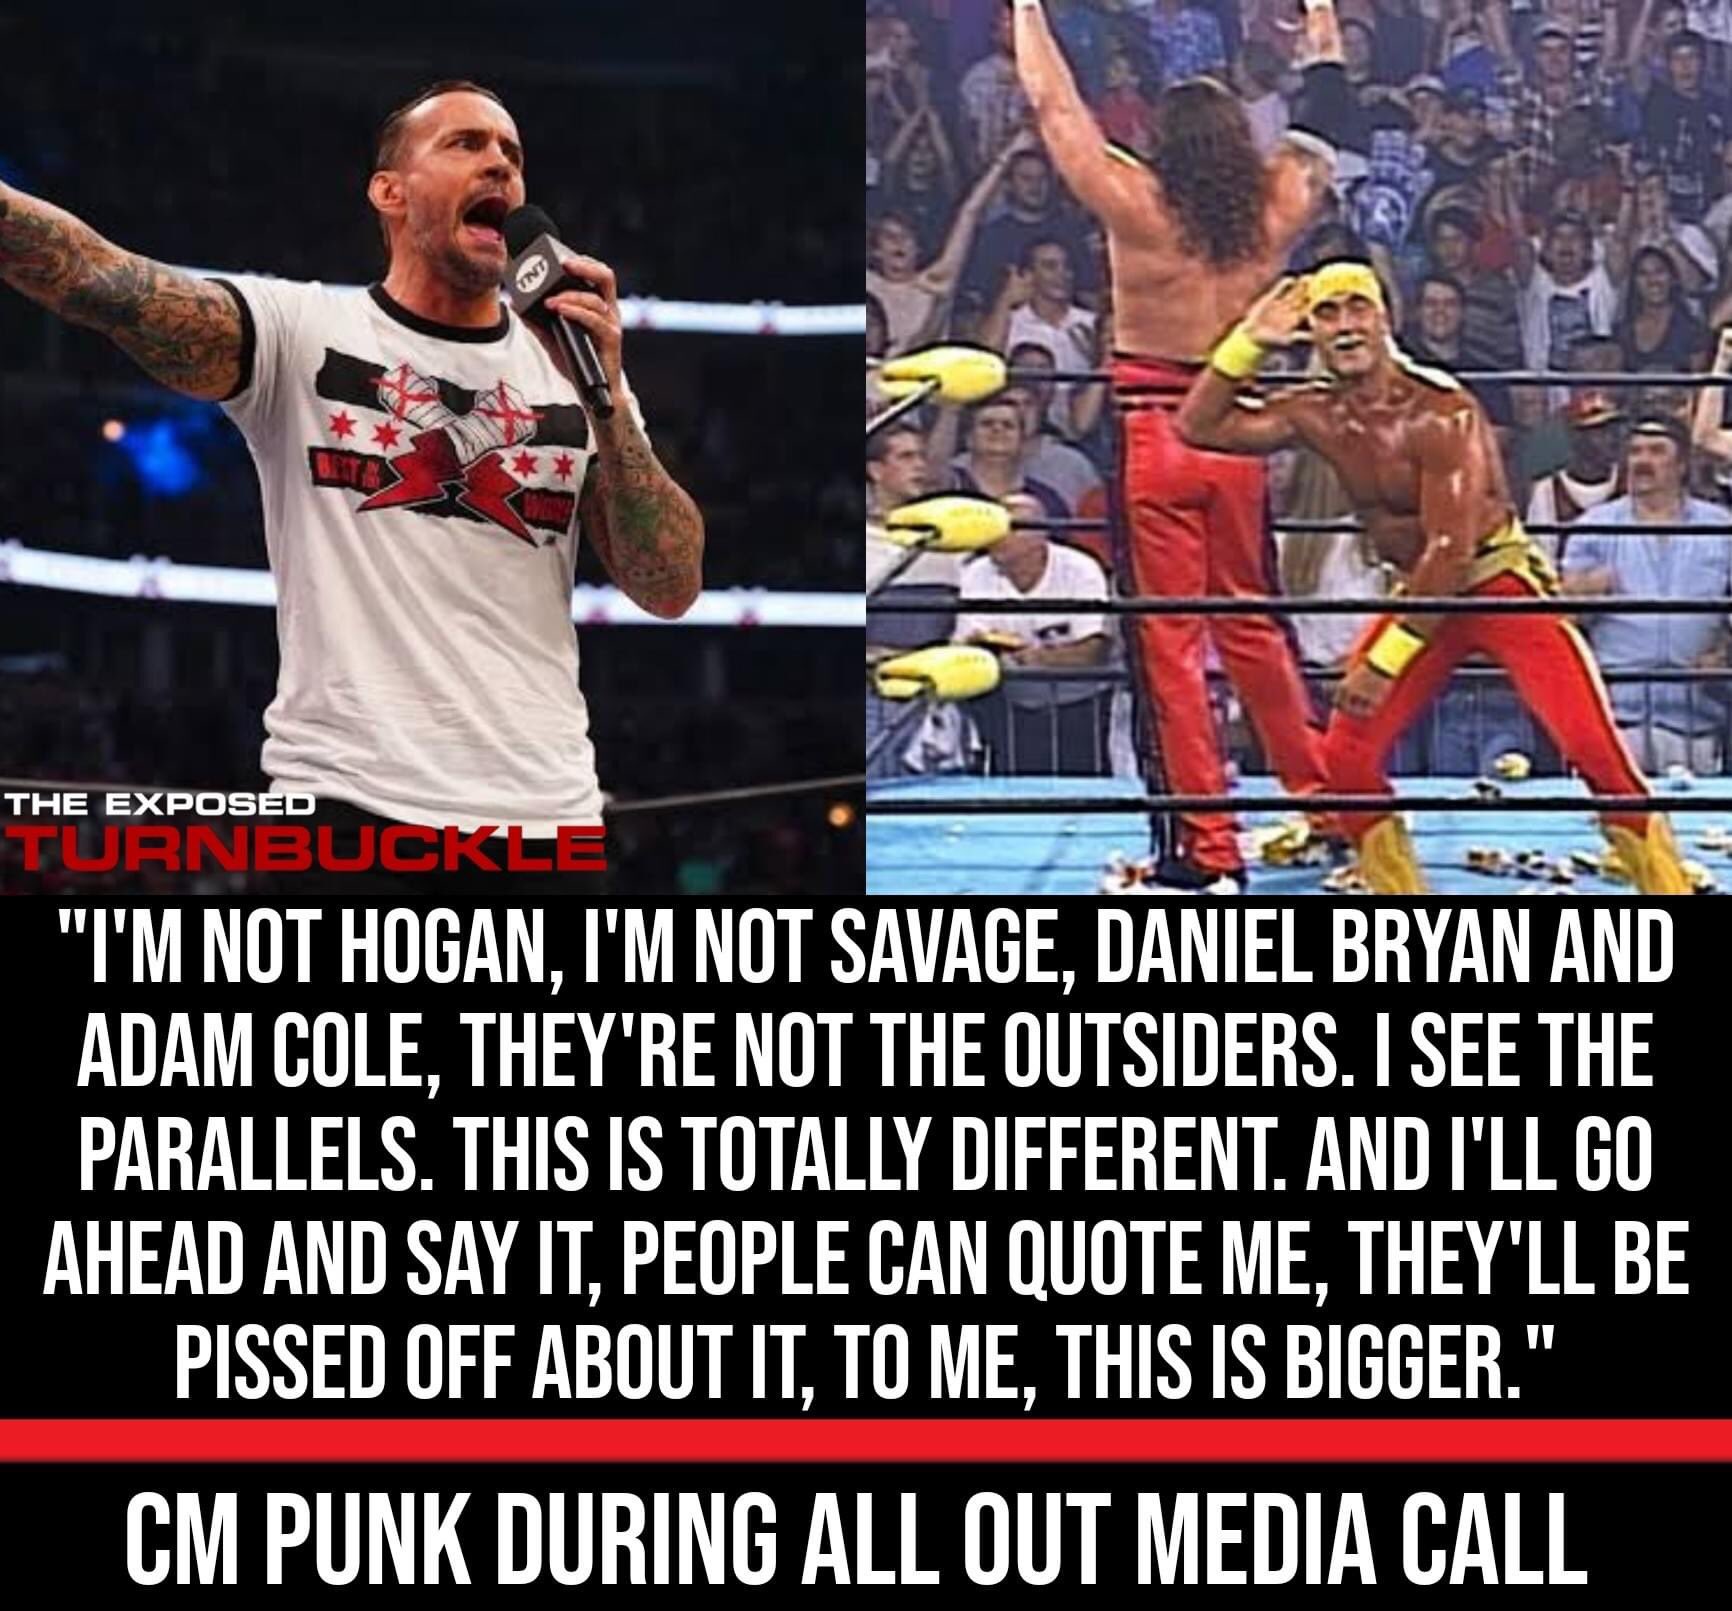 Getthetables What Are Your Thoughts On Cm Punk S Thoughts On Last Nights Debuts Aew Aewallout T Co 7khv0tv6ln Twitter